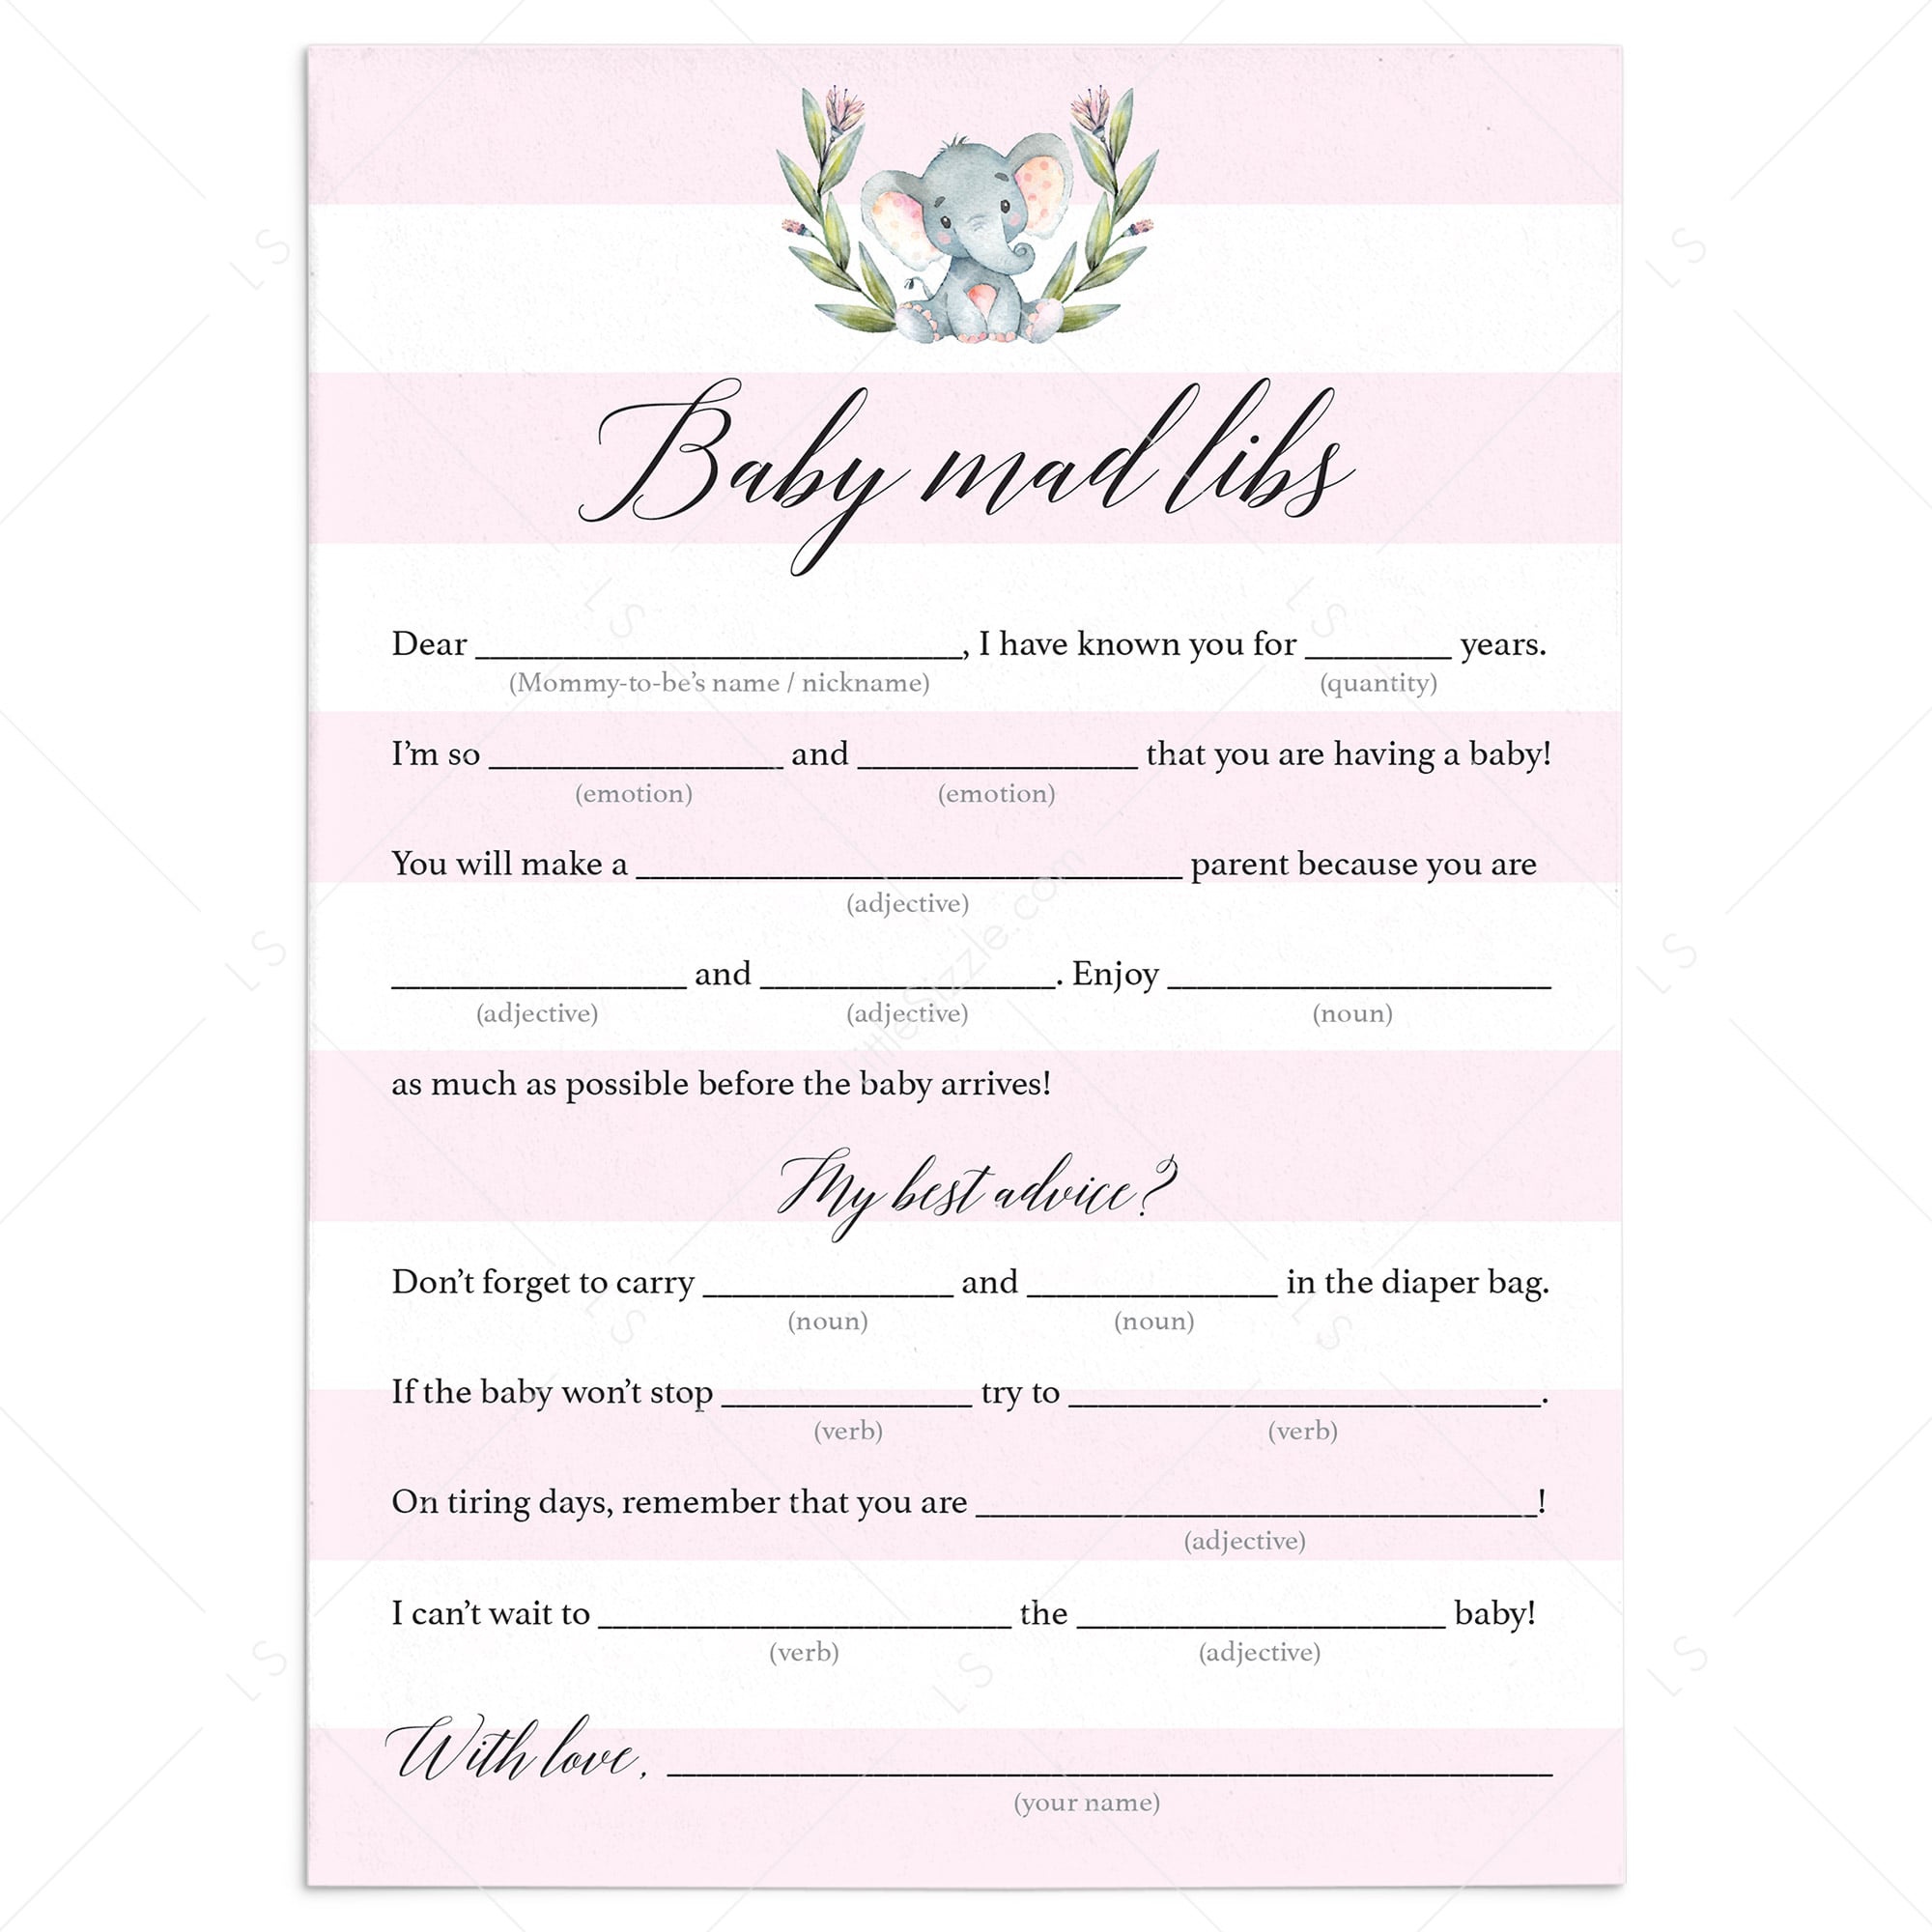 Elephant baby shower mad libs game printable by LittleSizzle